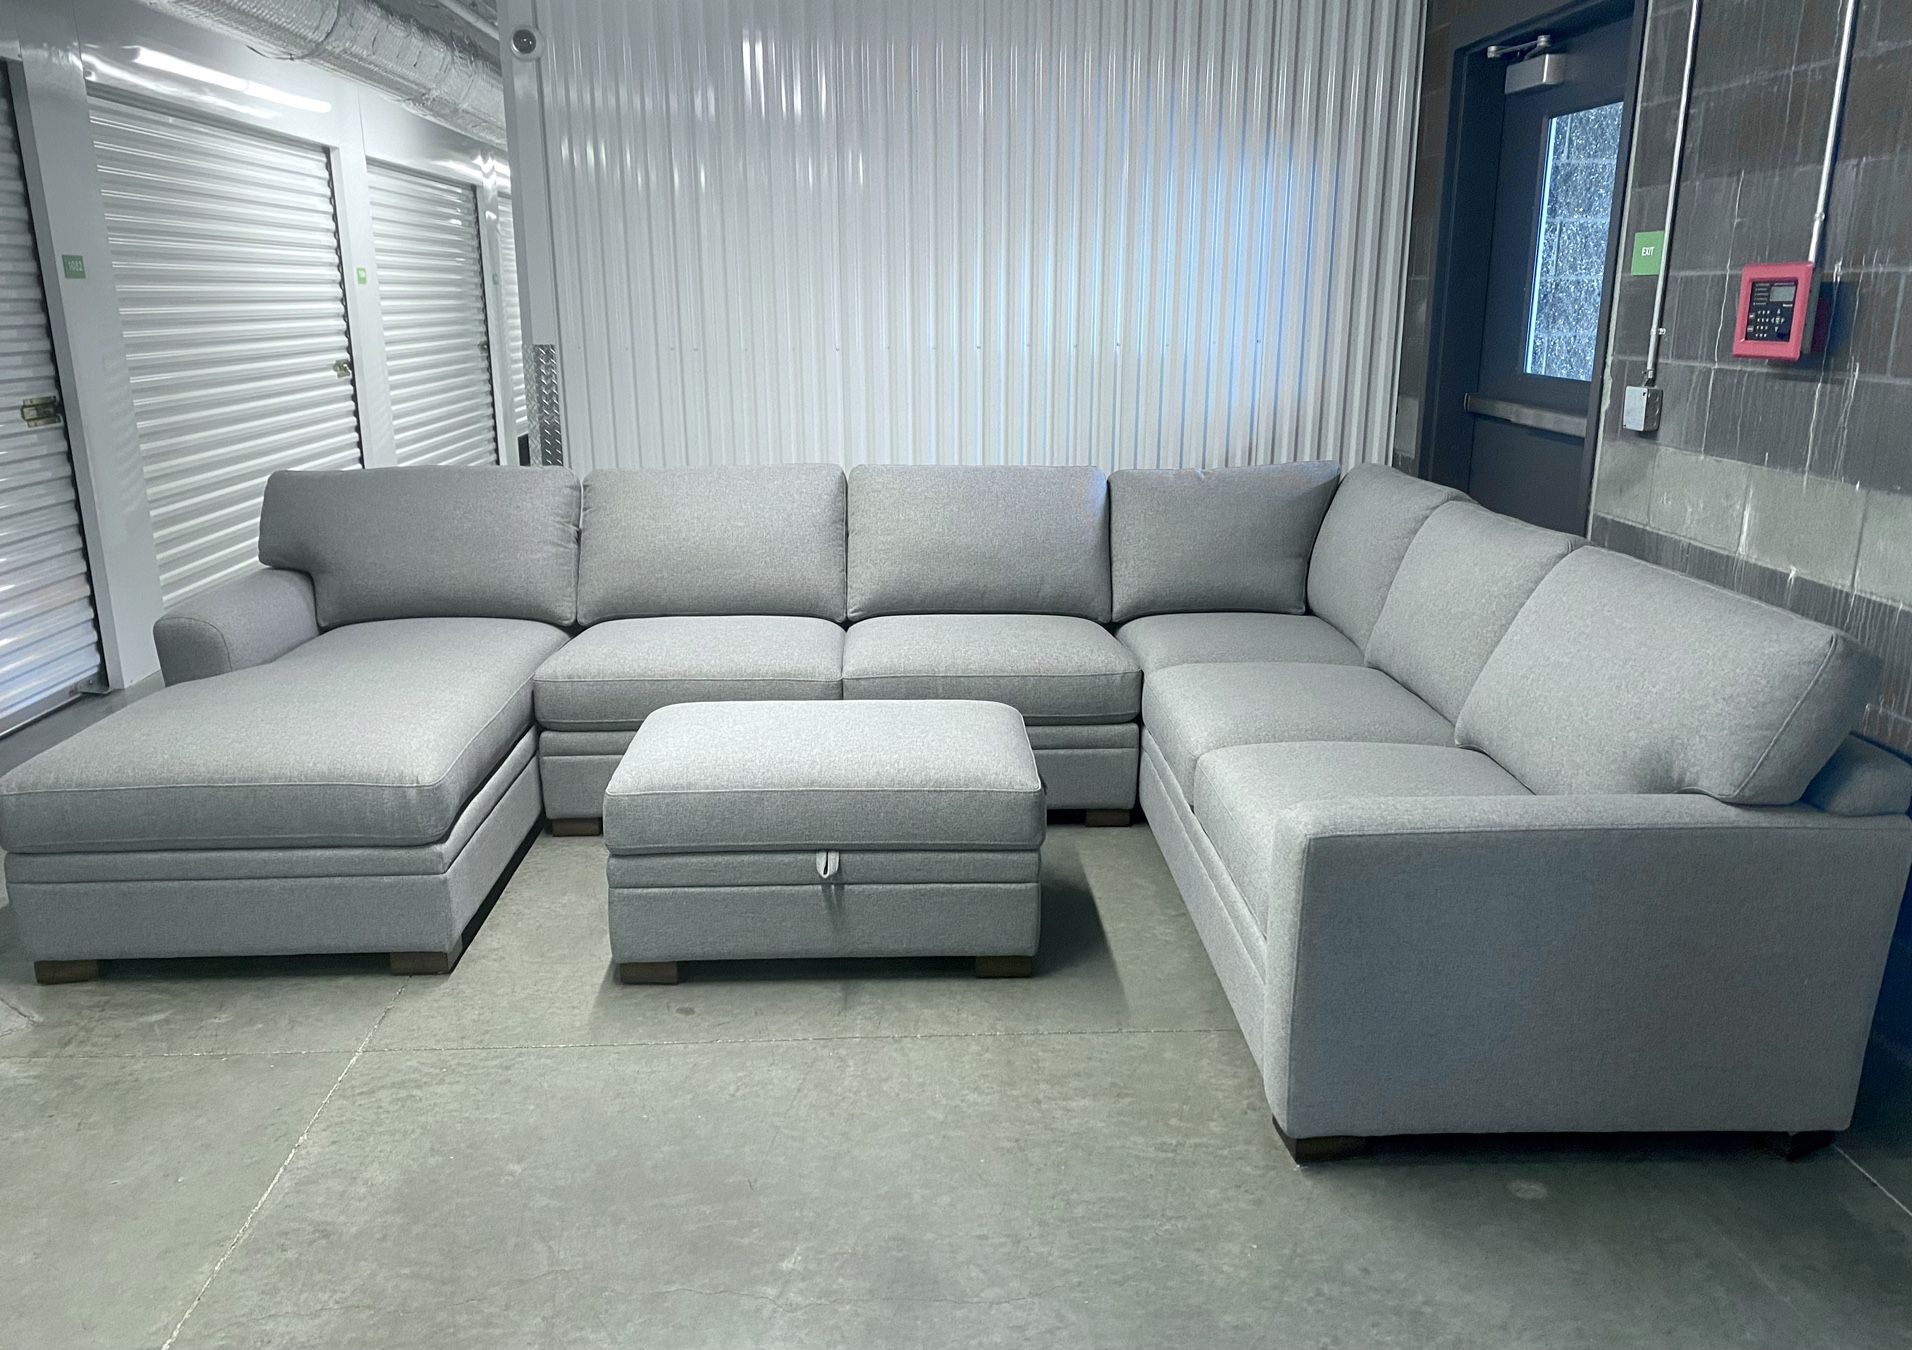 Free Delivery- Brand New Thomasville Ushaped Sectional Sofa With Storage Ottoman 